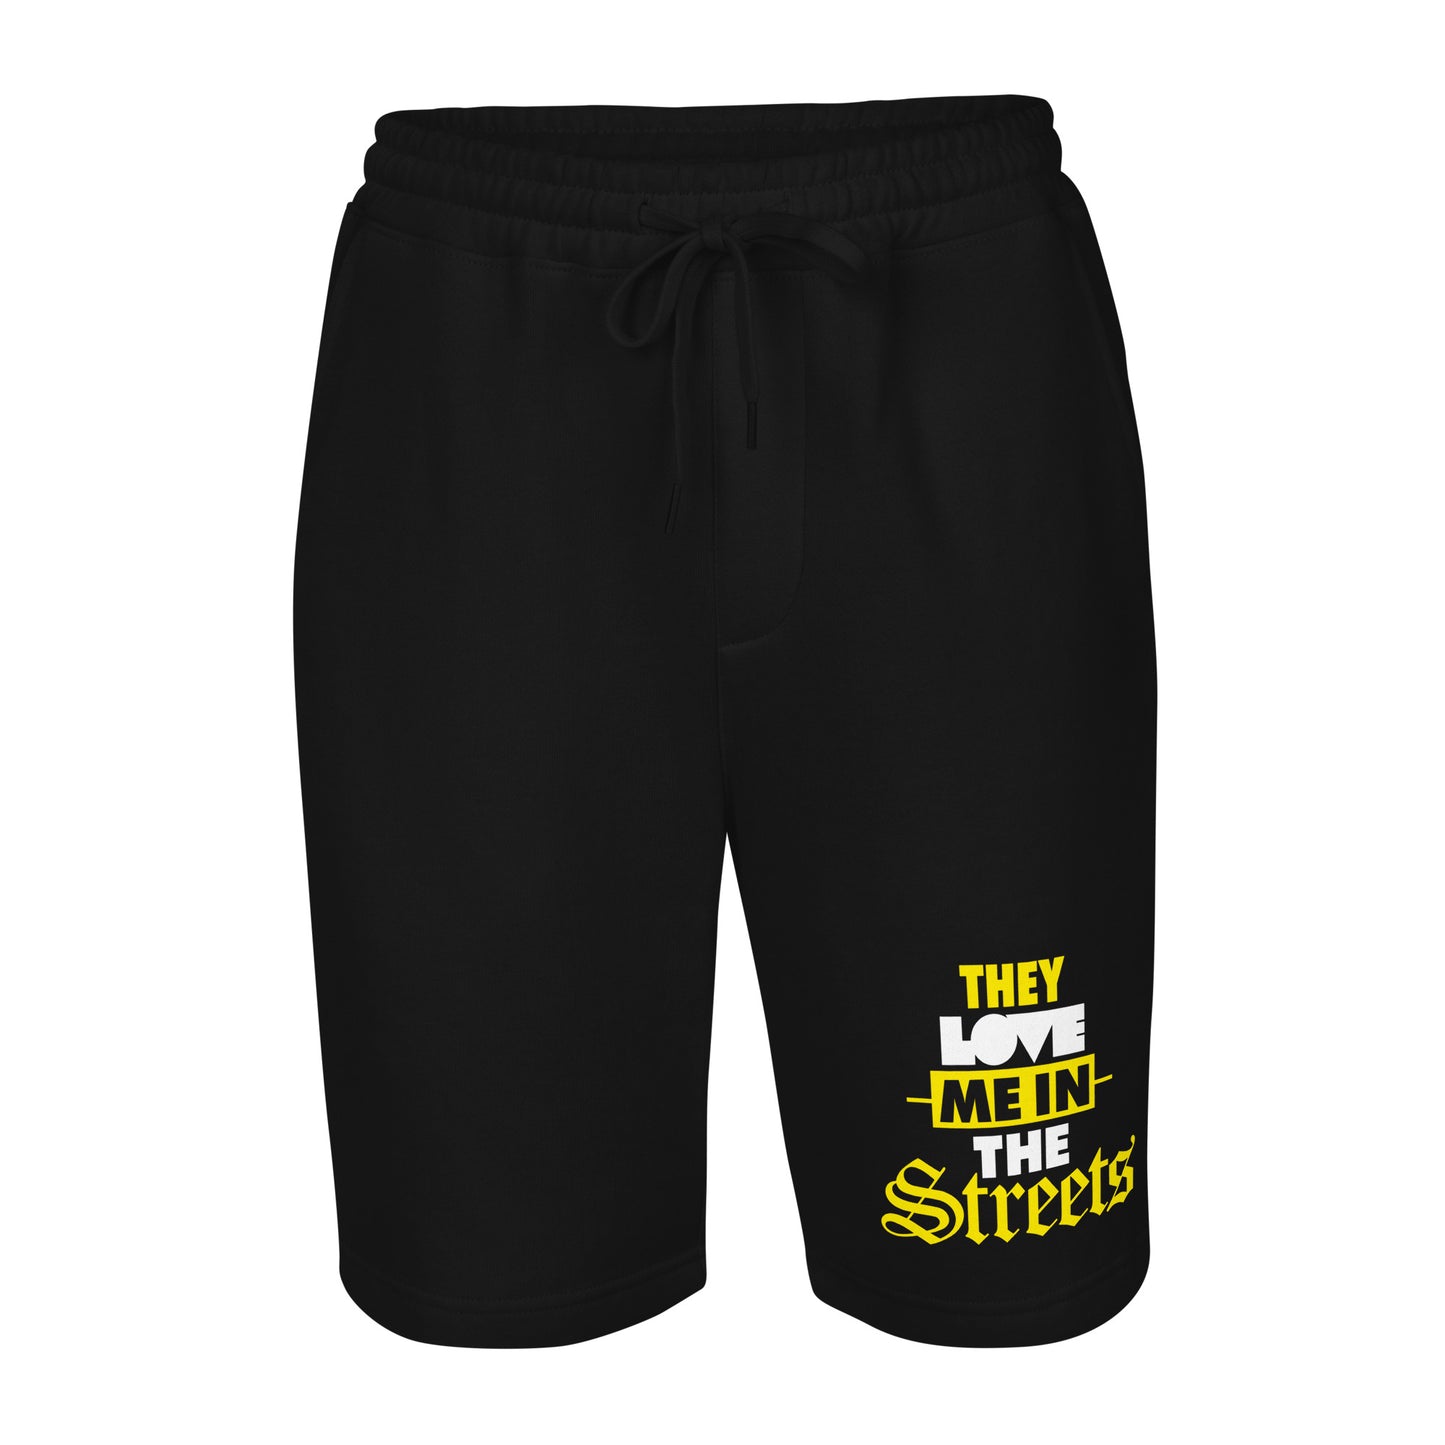 Love me in the streets Men's shorts